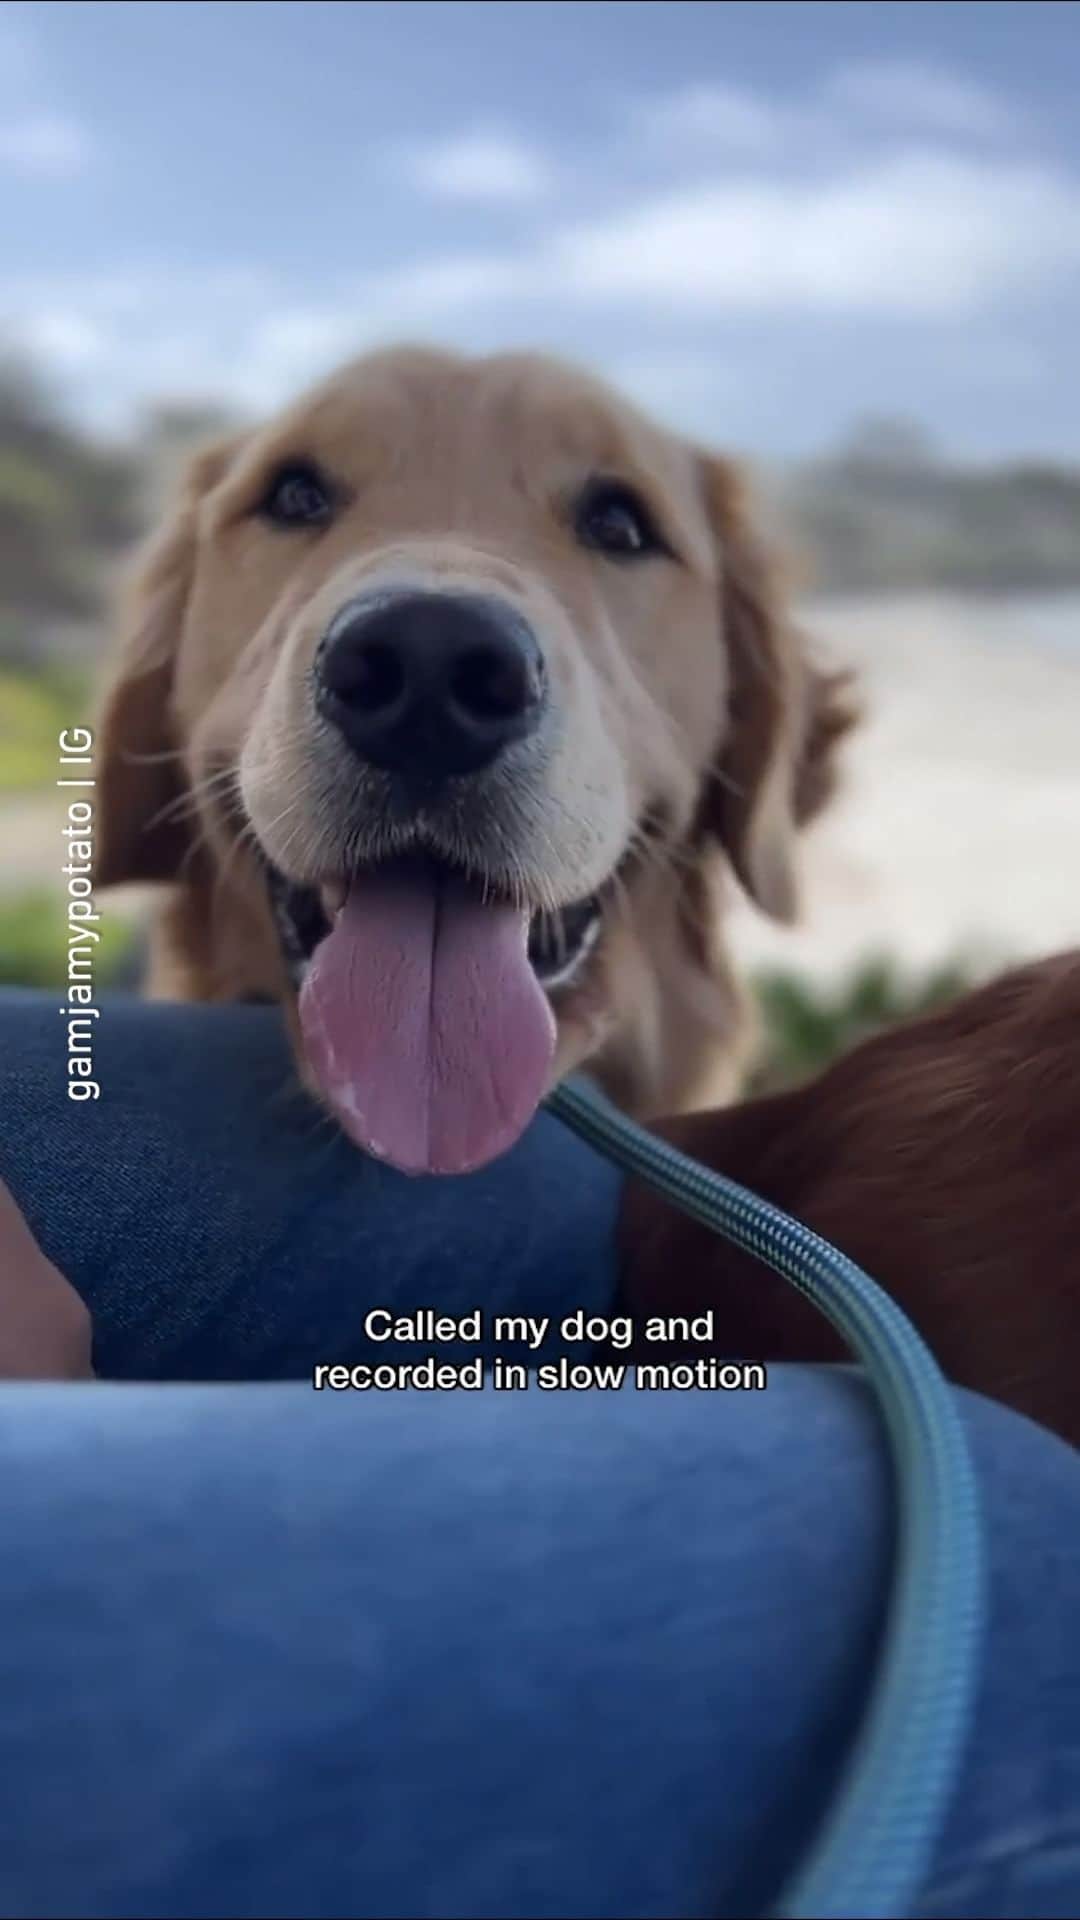 9GAGのインスタグラム：「The ear and tongue has a mind of its own | Follow @barked for more funny dogs! - 📹 @gamjamypotato - #barked #dog #doggo #GoldenRetriever #9gag」